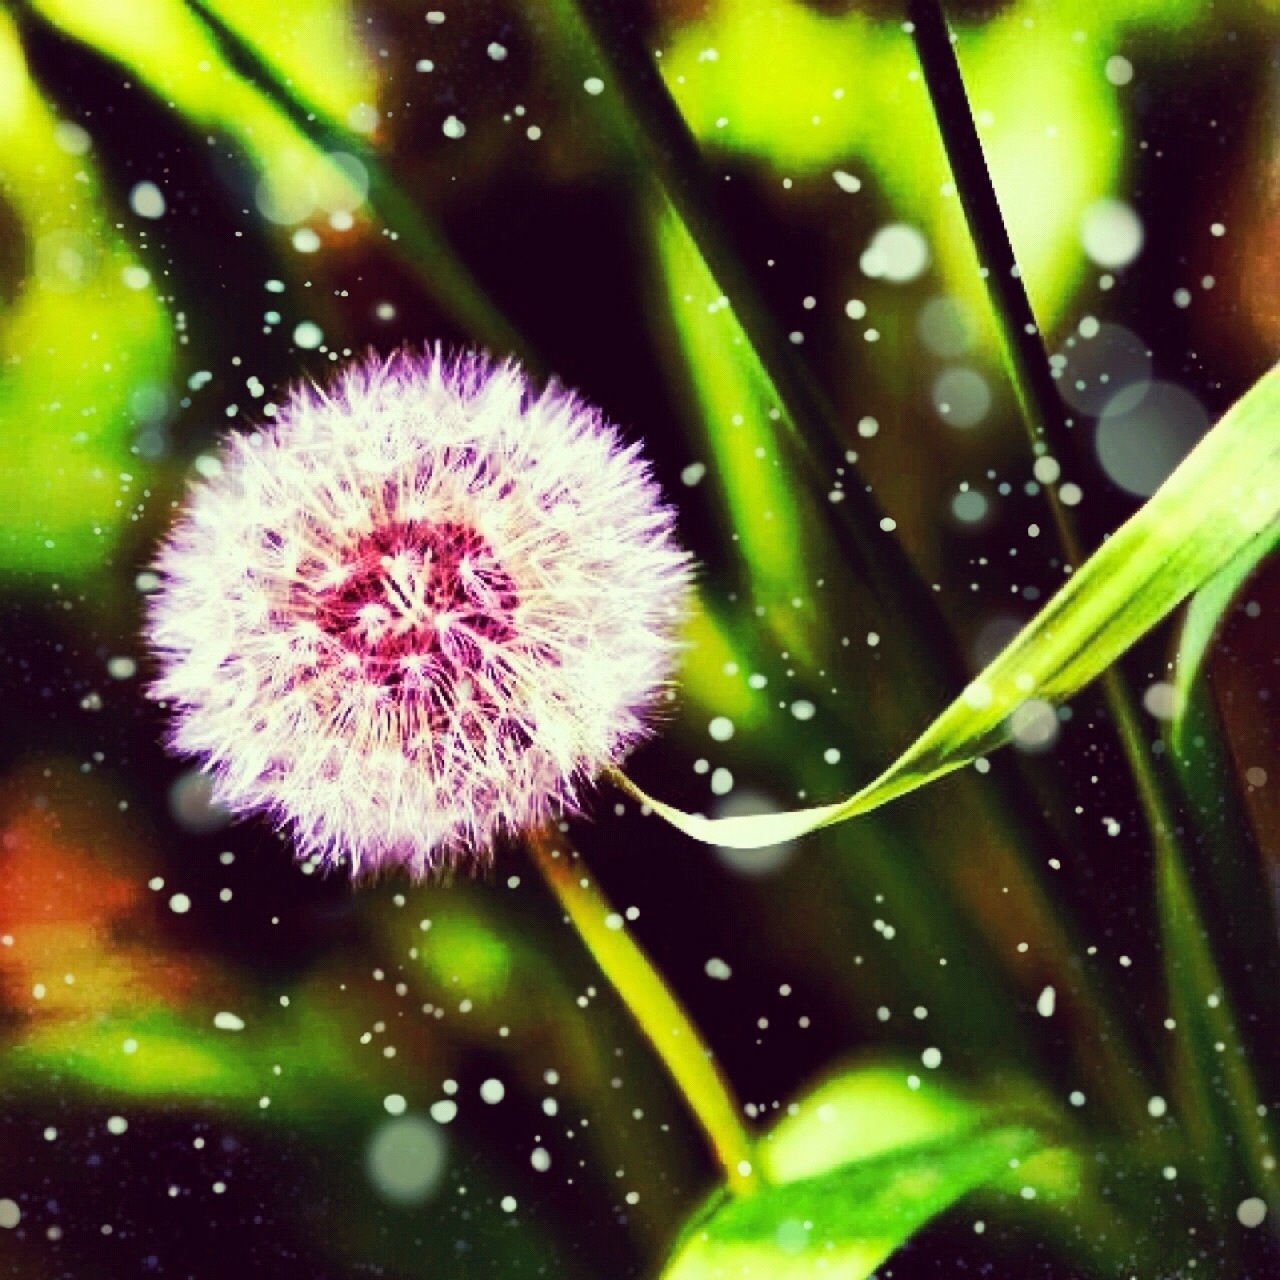 drop, water, fragility, freshness, growth, close-up, flower, wet, beauty in nature, dew, nature, focus on foreground, plant, flower head, raindrop, single flower, dandelion, outdoors, selective focus, no people